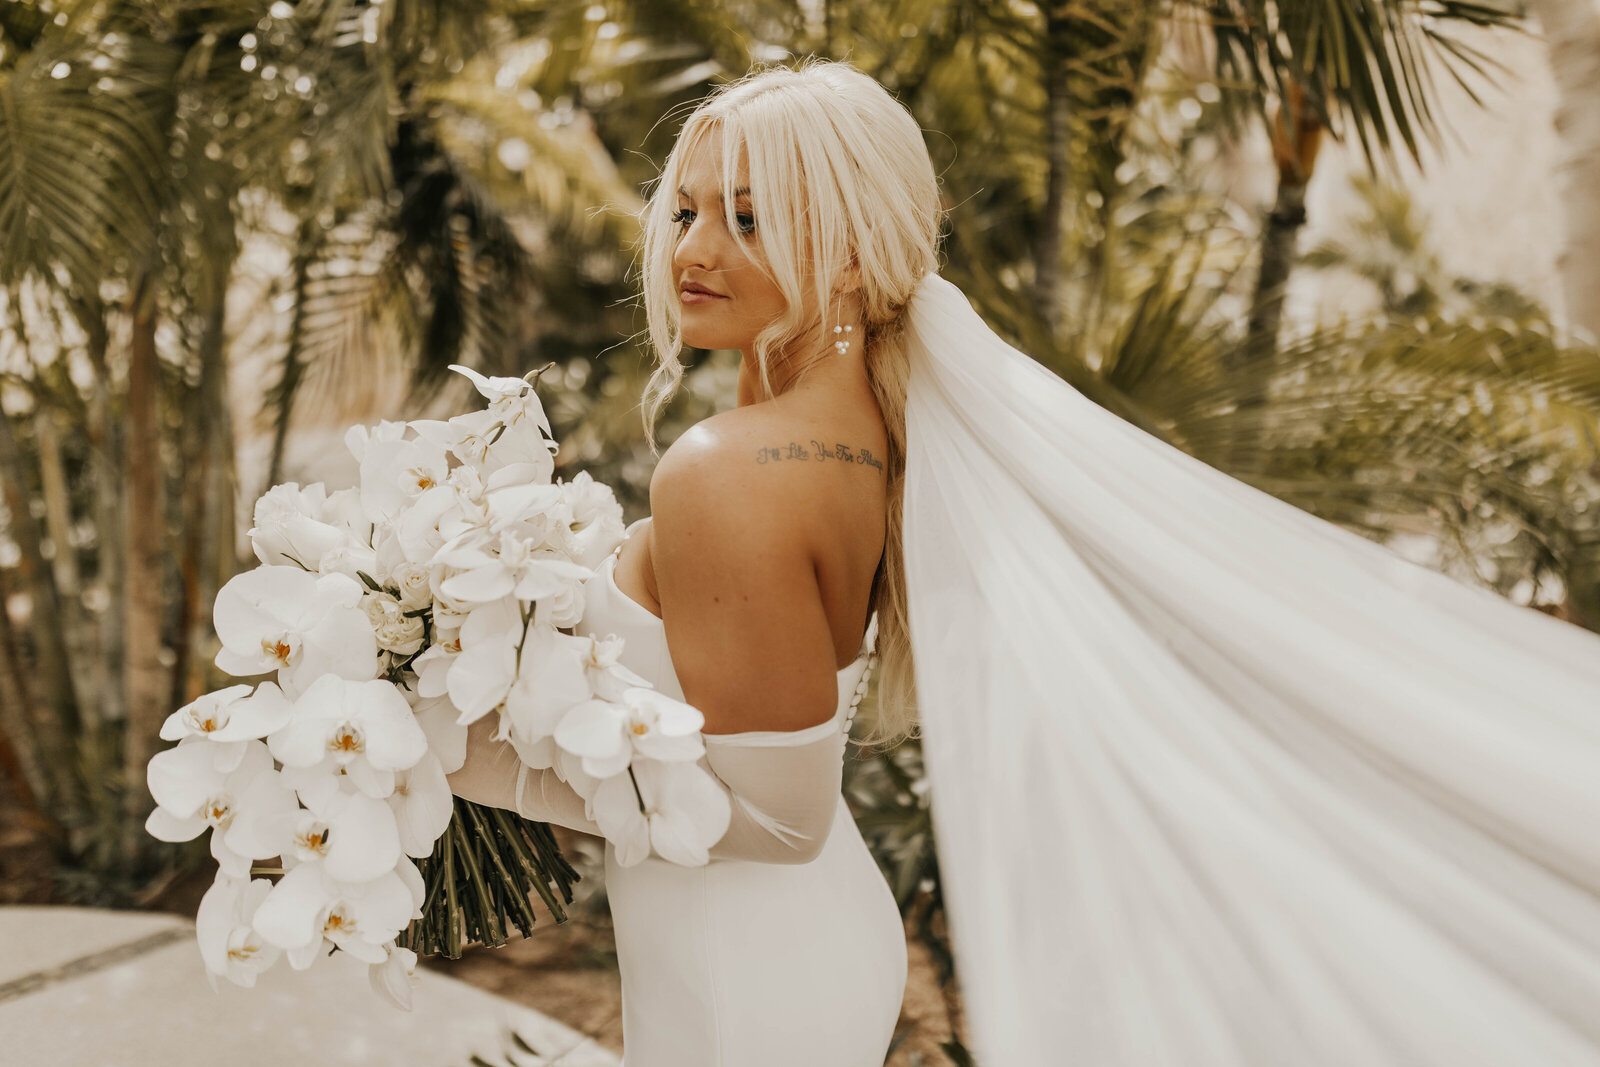 Blonde bride holding florals with long veil in front of palm trees